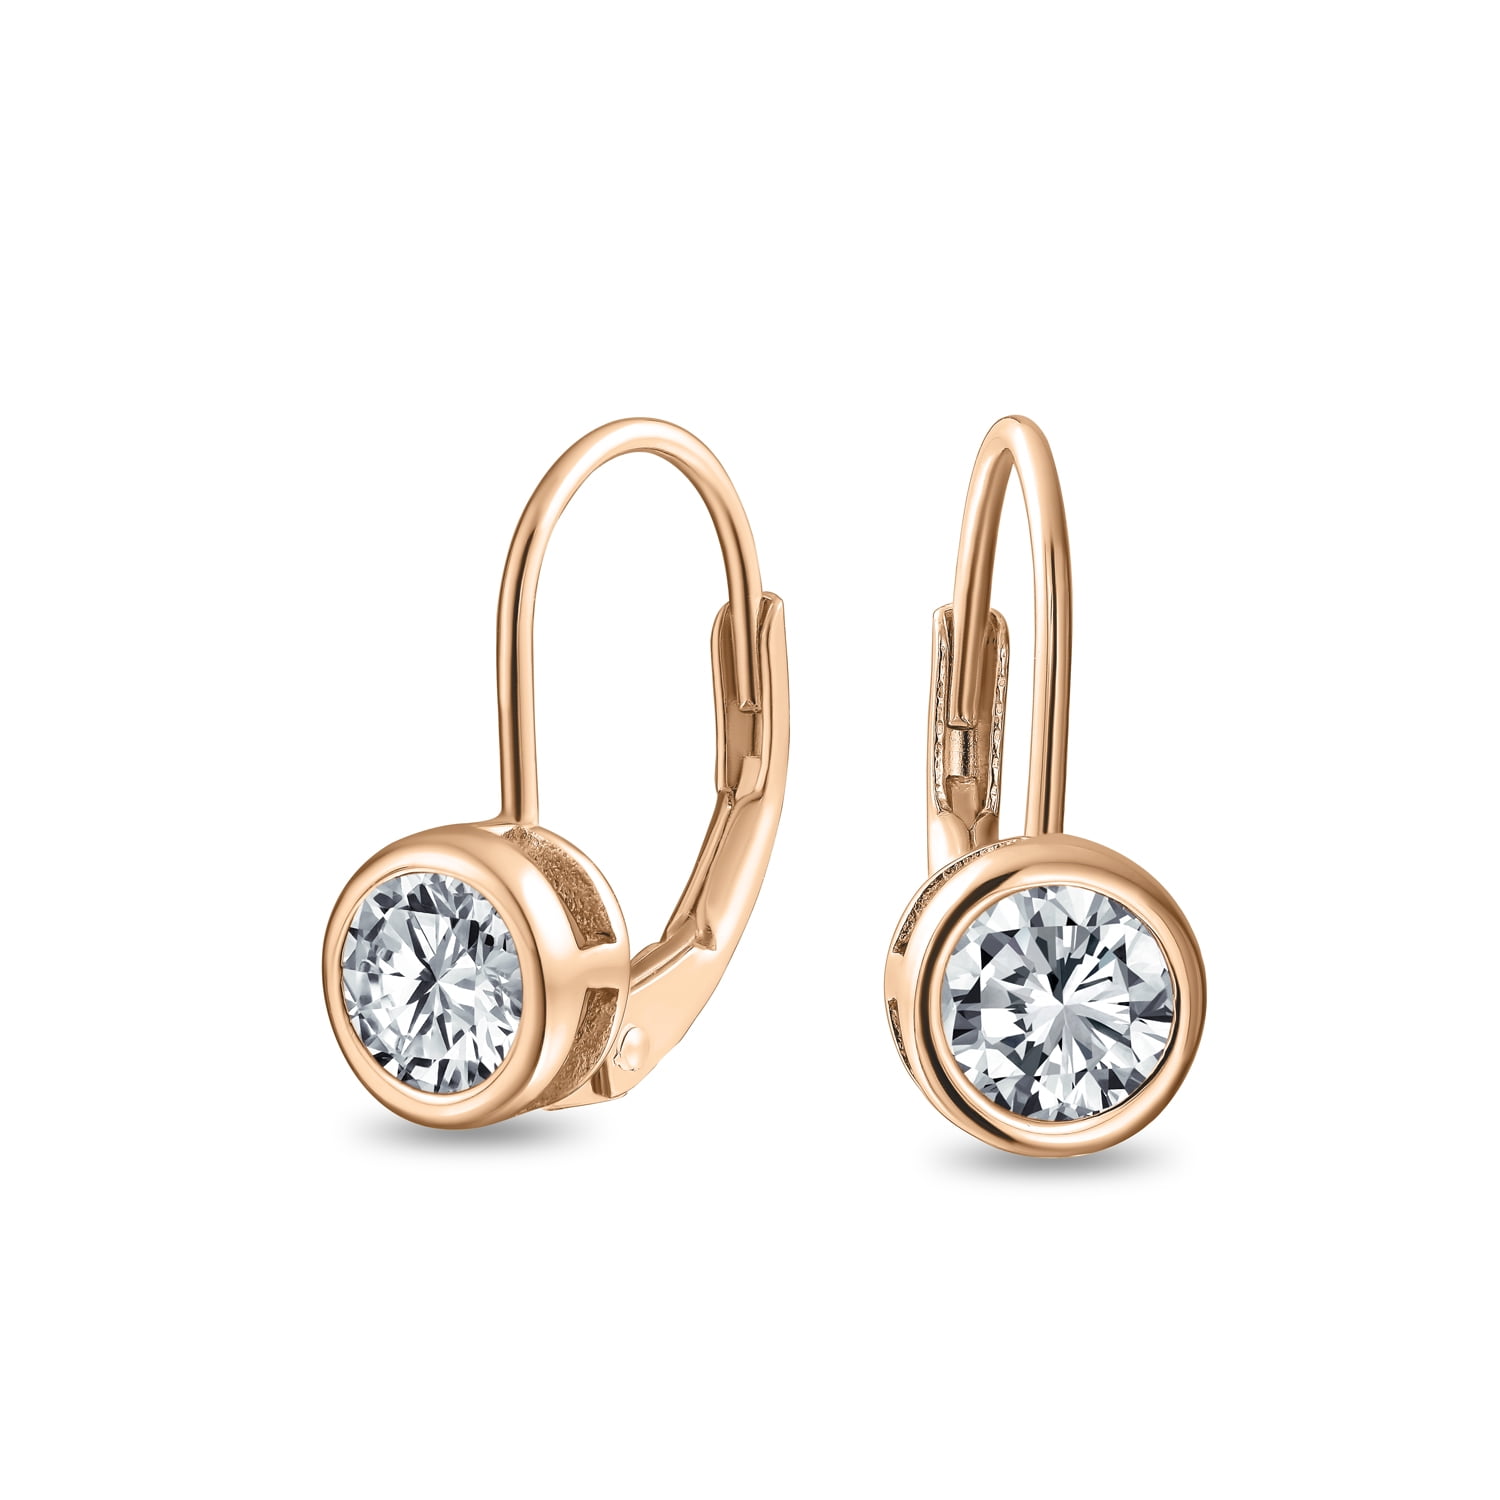 Female Shining Opening Round Full CZ Stud Earrings For Party Engagement